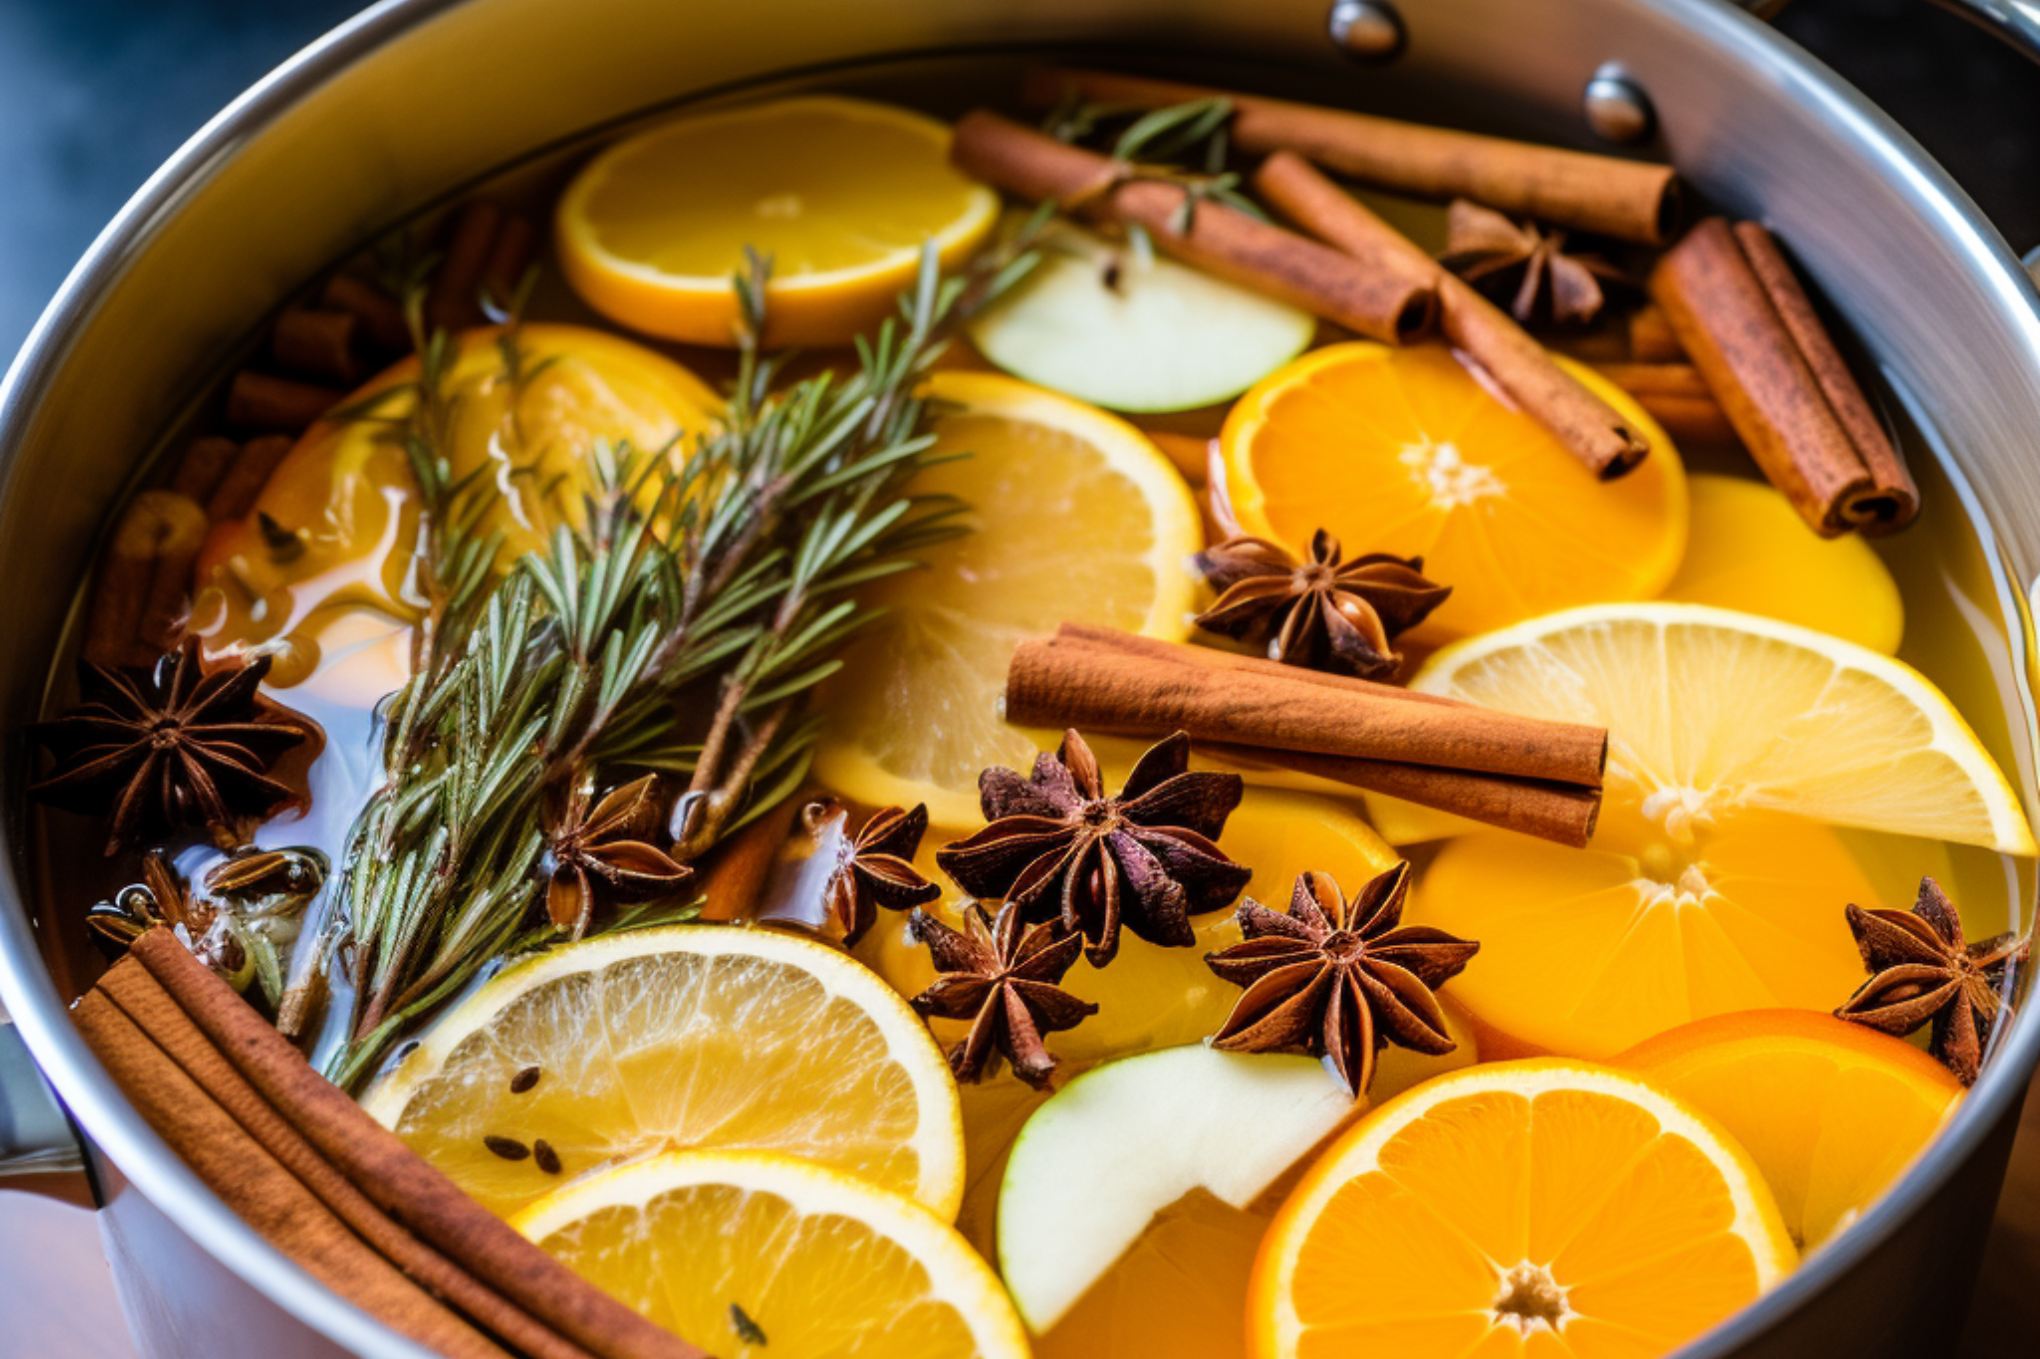 Homemade Fall Stovetop Potpourri - Simmer Pot Recipe - At Home On